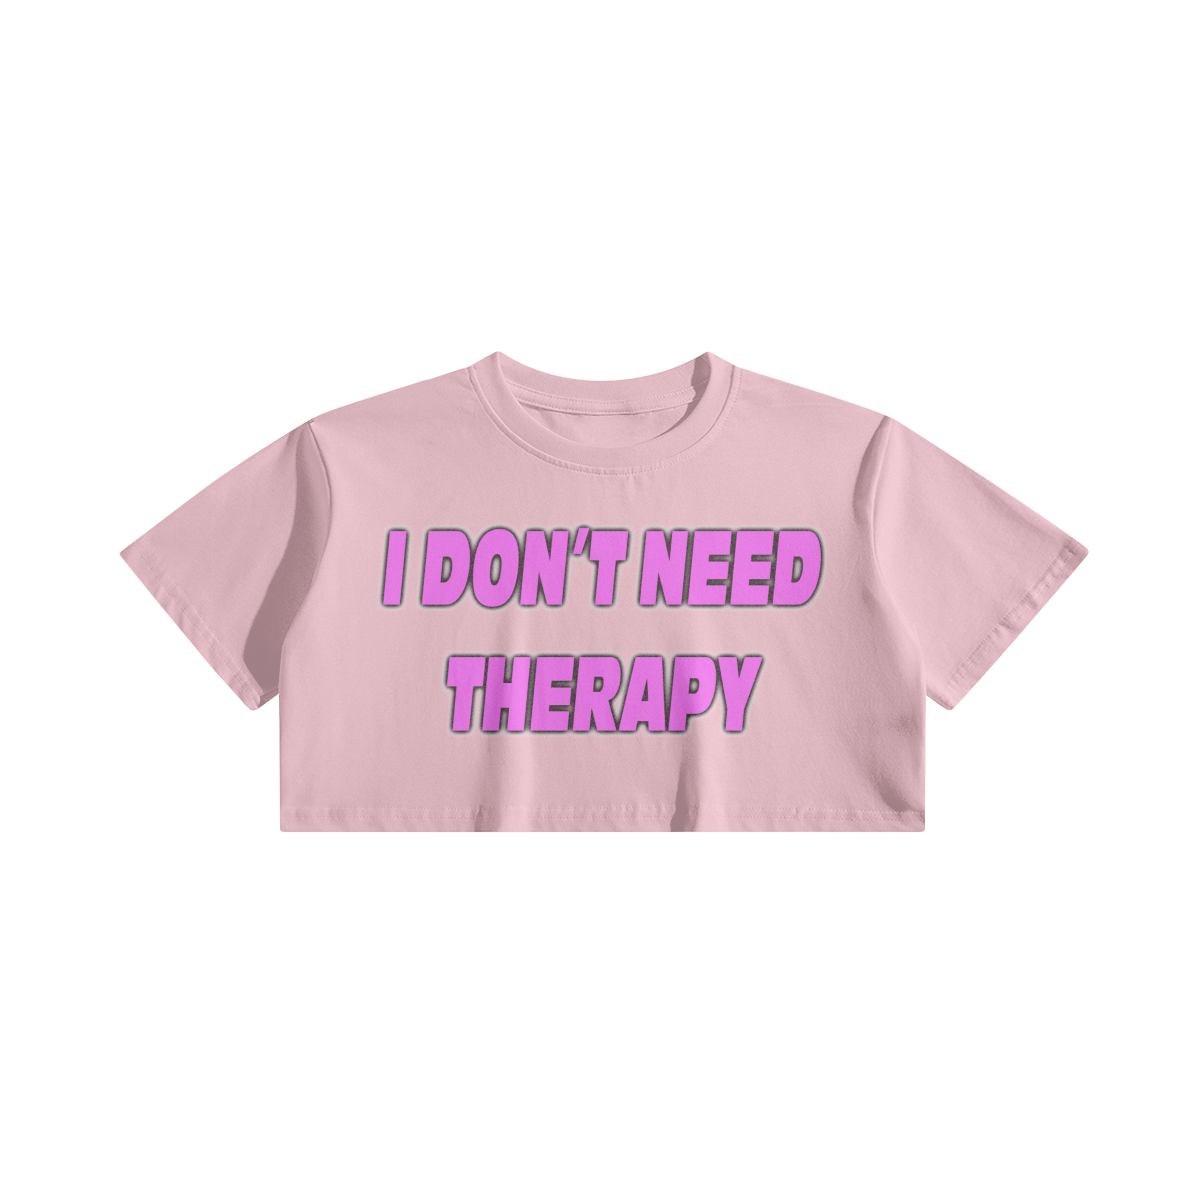 I Don't Need Therapy crop top